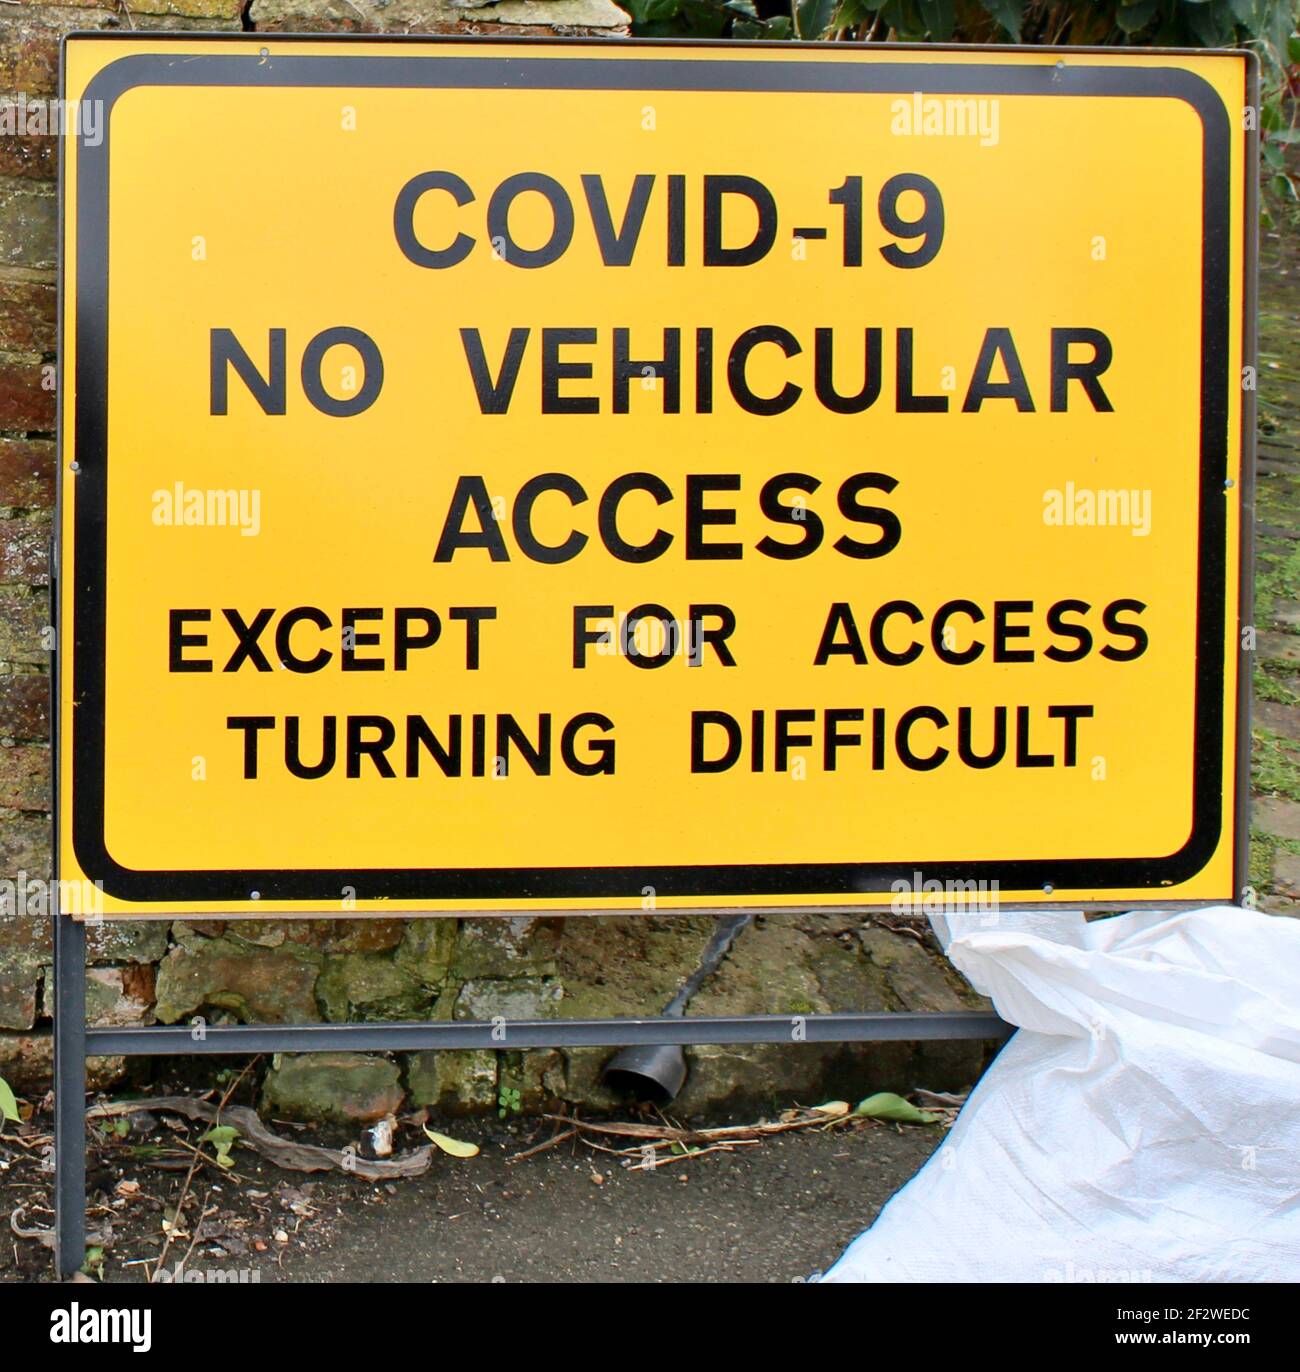 Covid-19 No Vehicular Access Except For Access Turning Difficult road sign. One of the road signs appearing during the coronavirus pandemic crisis Stock Photo